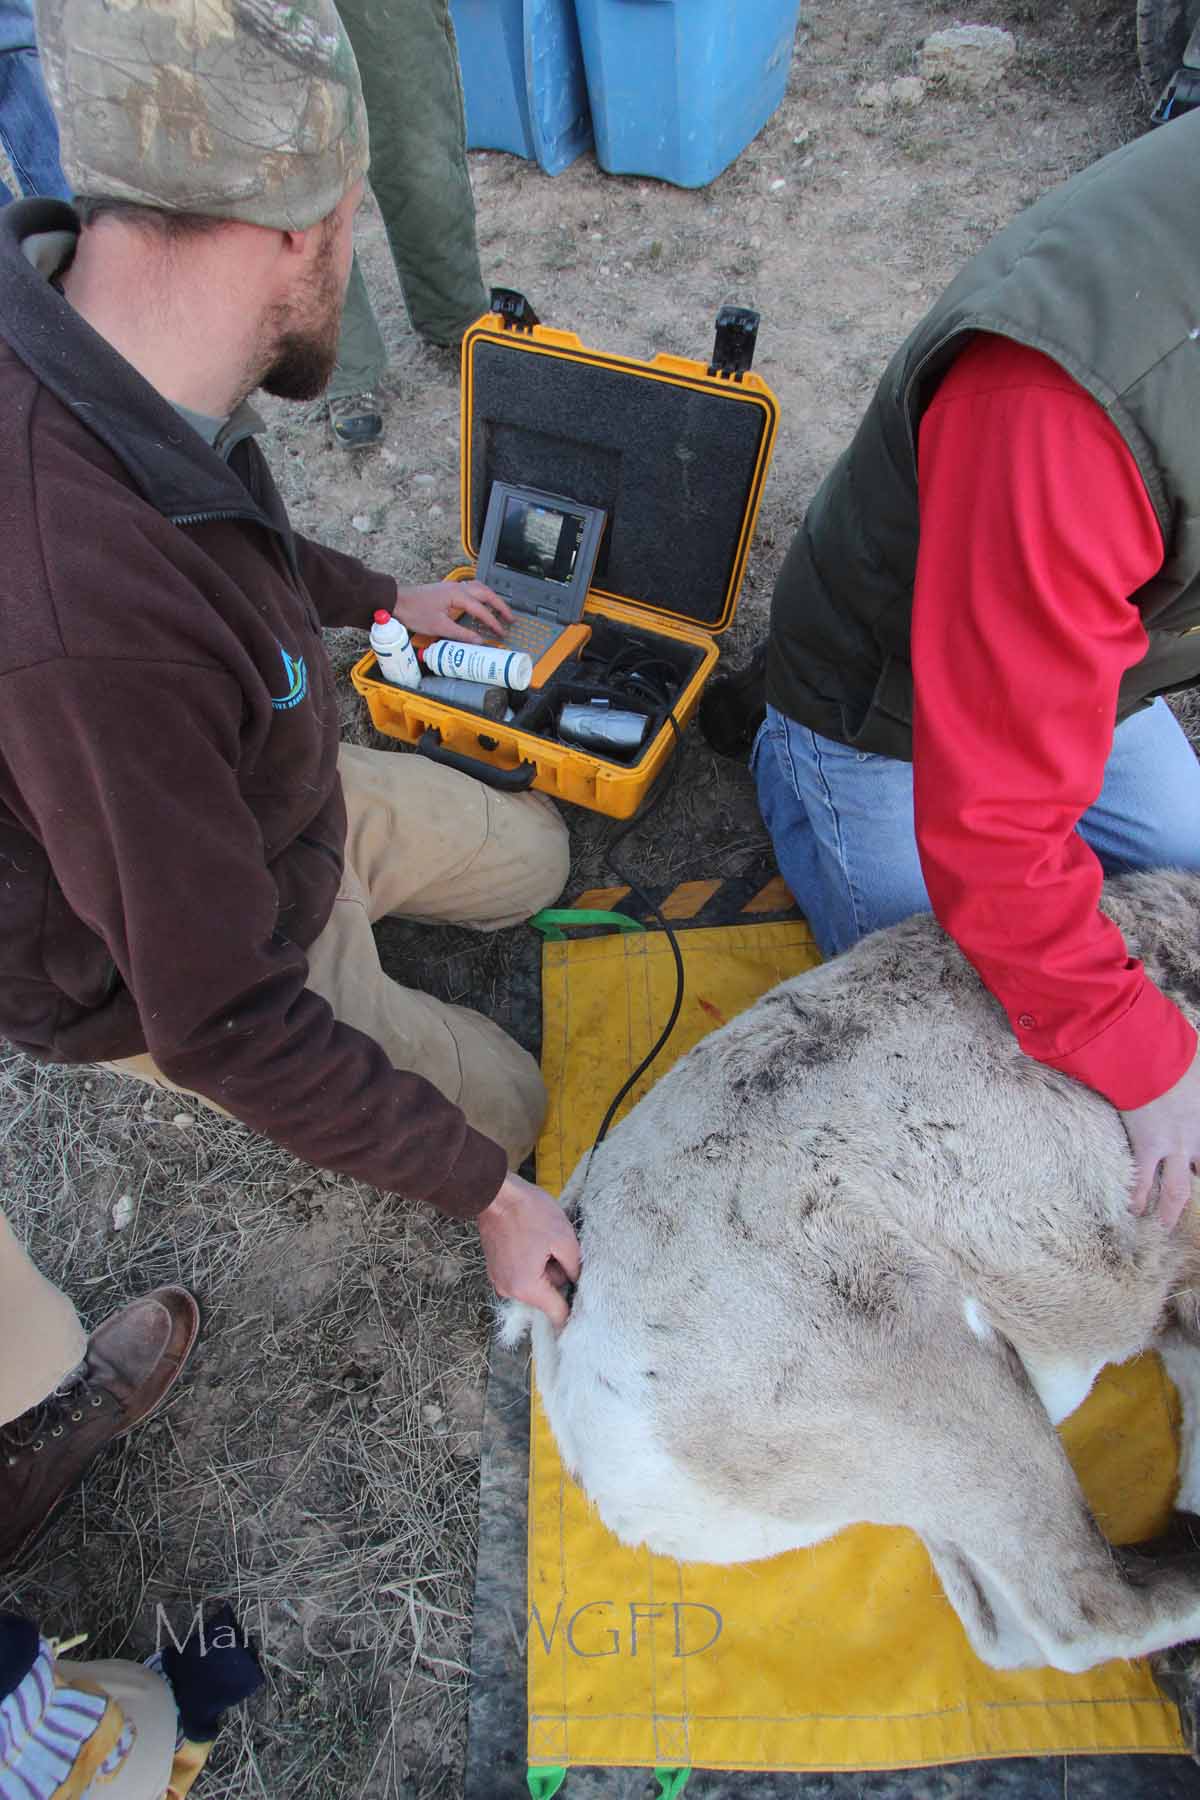 Kevin Monteith measuring body fat on a bighorn sheep ewe.